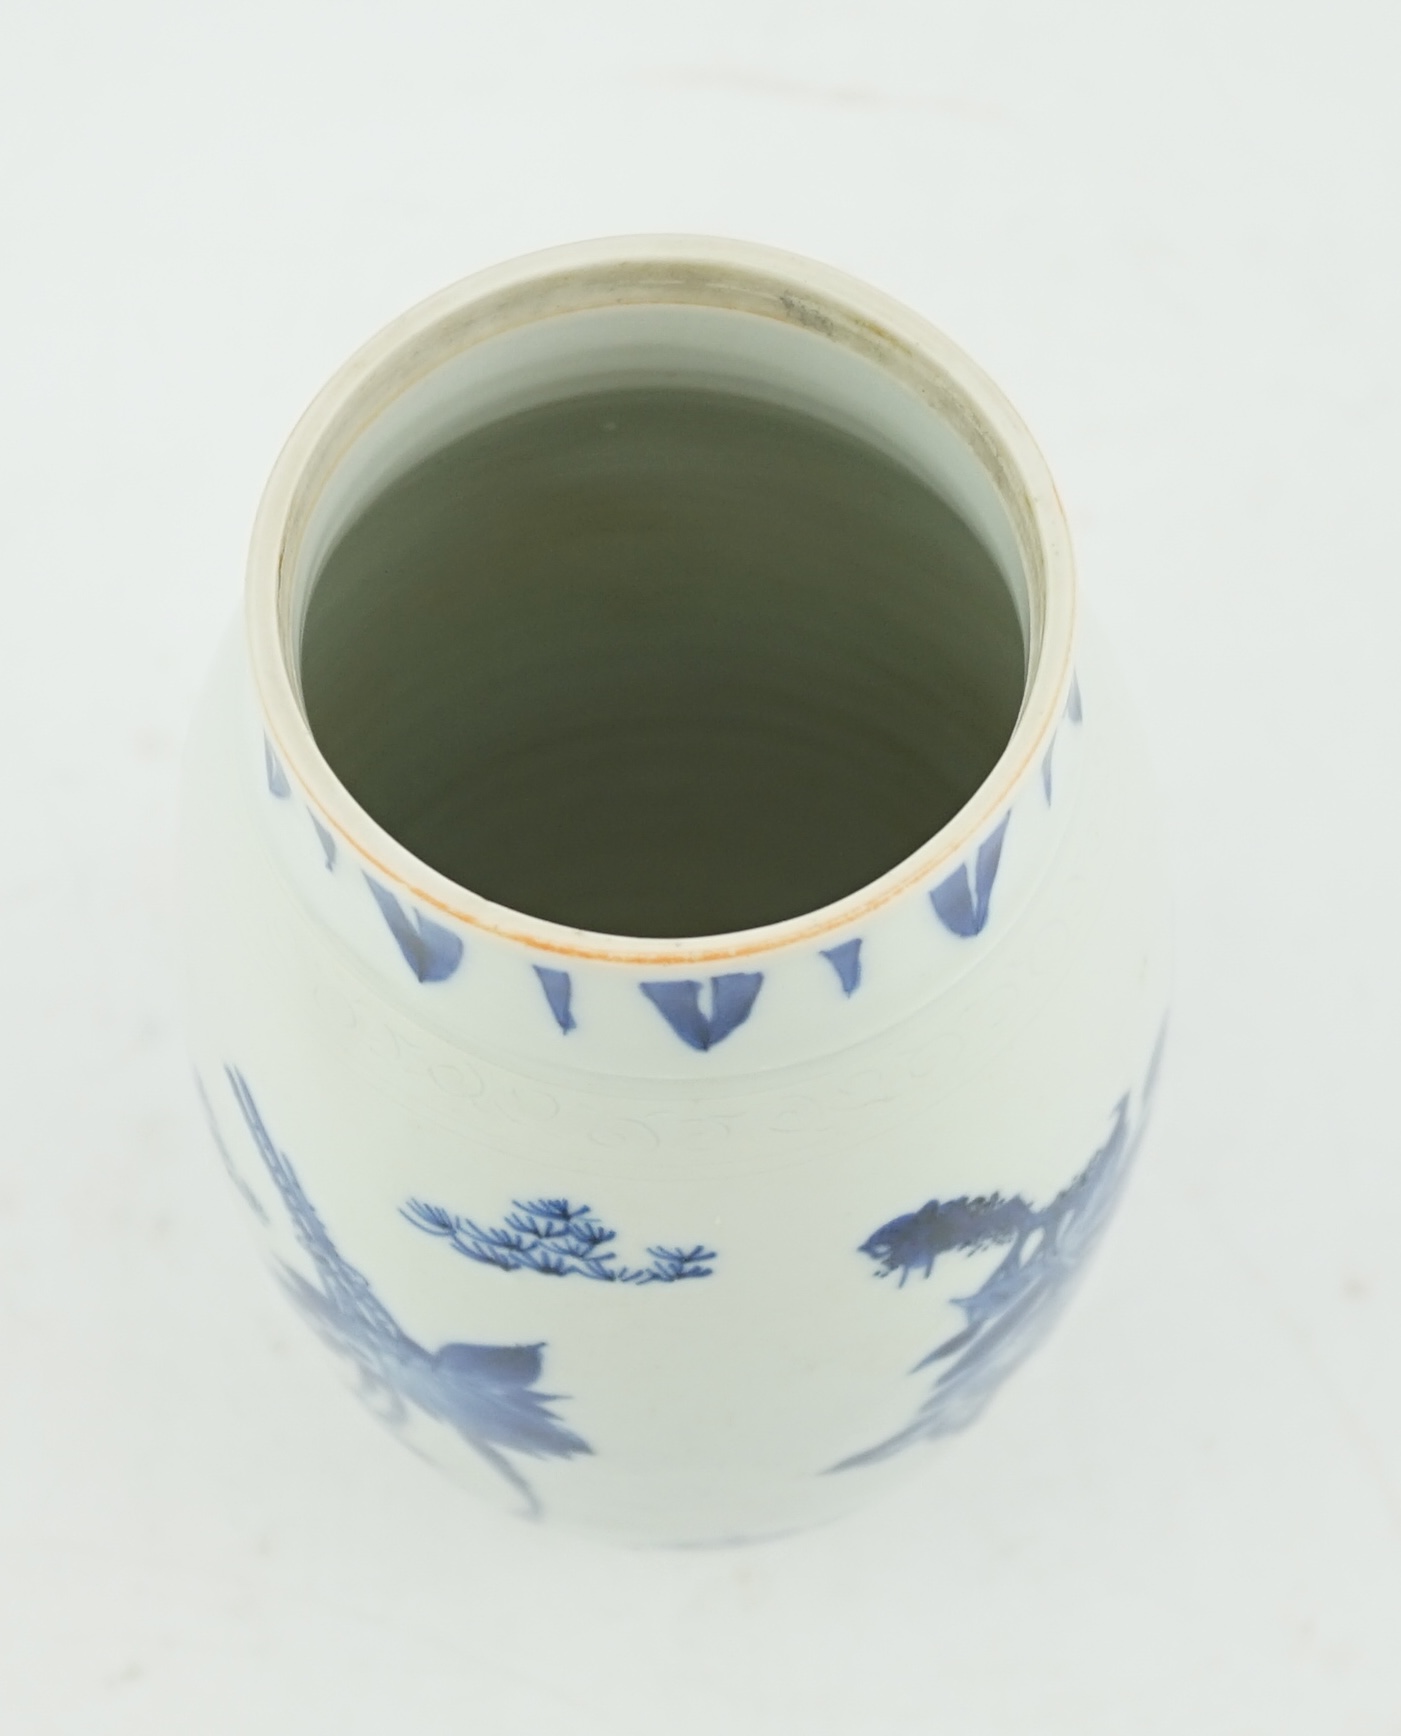 A Chinese Transitional blue and white jar, c.1640